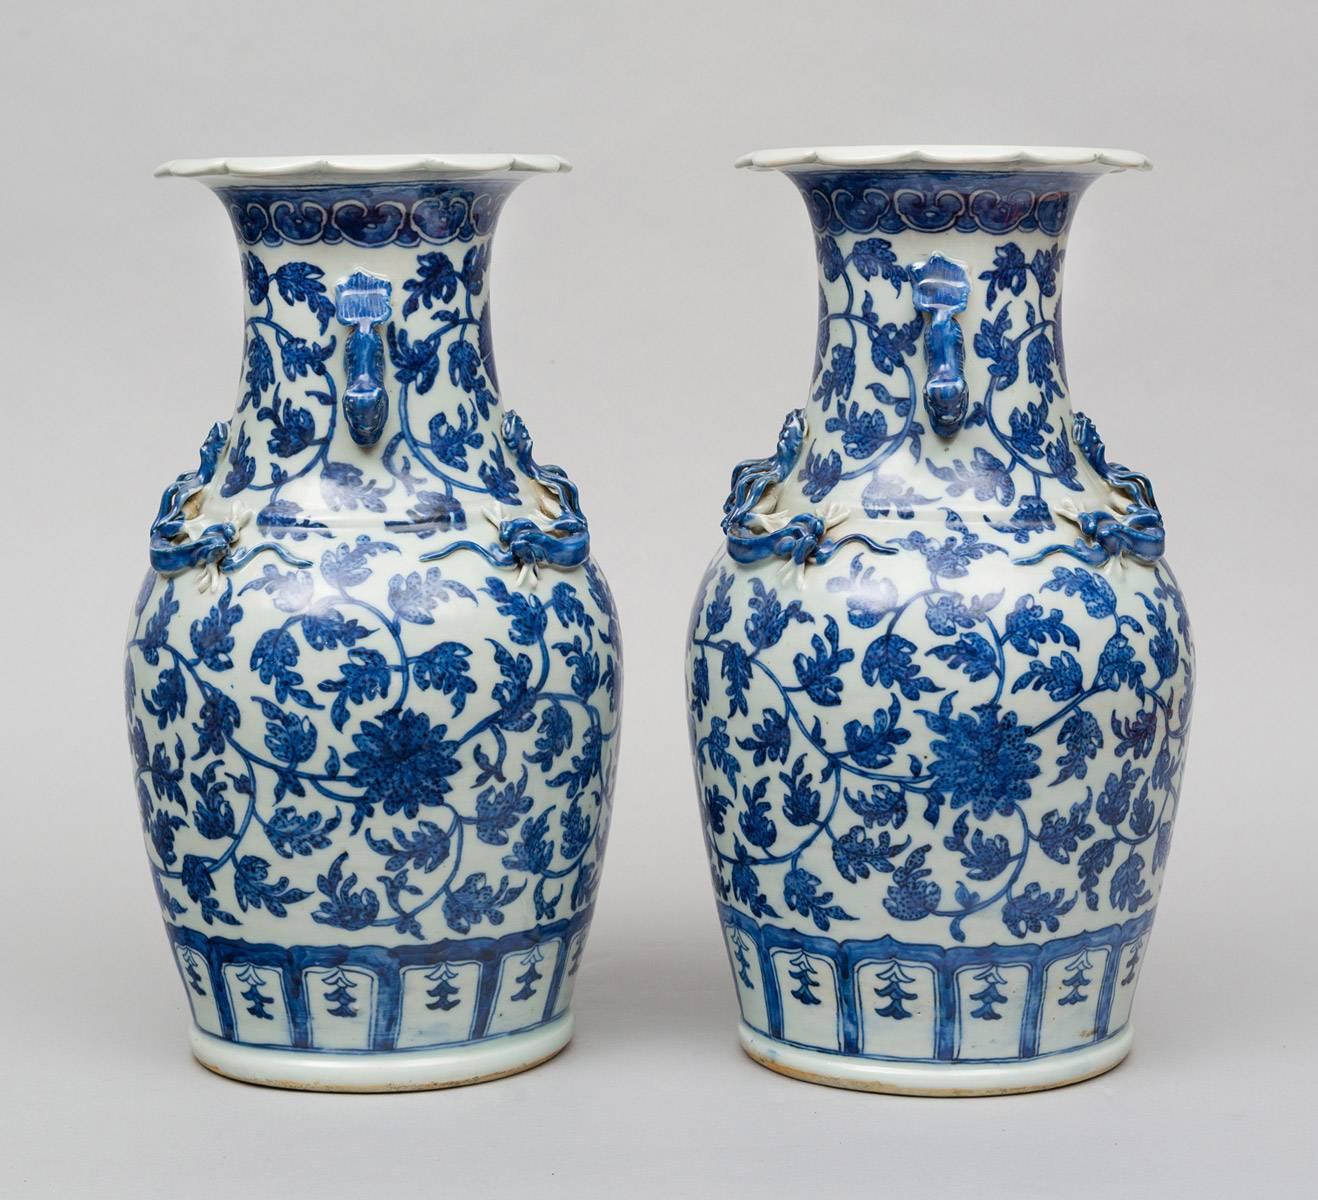 Glazed Pair of Chinese Blue and White Open Vases, circa 1870